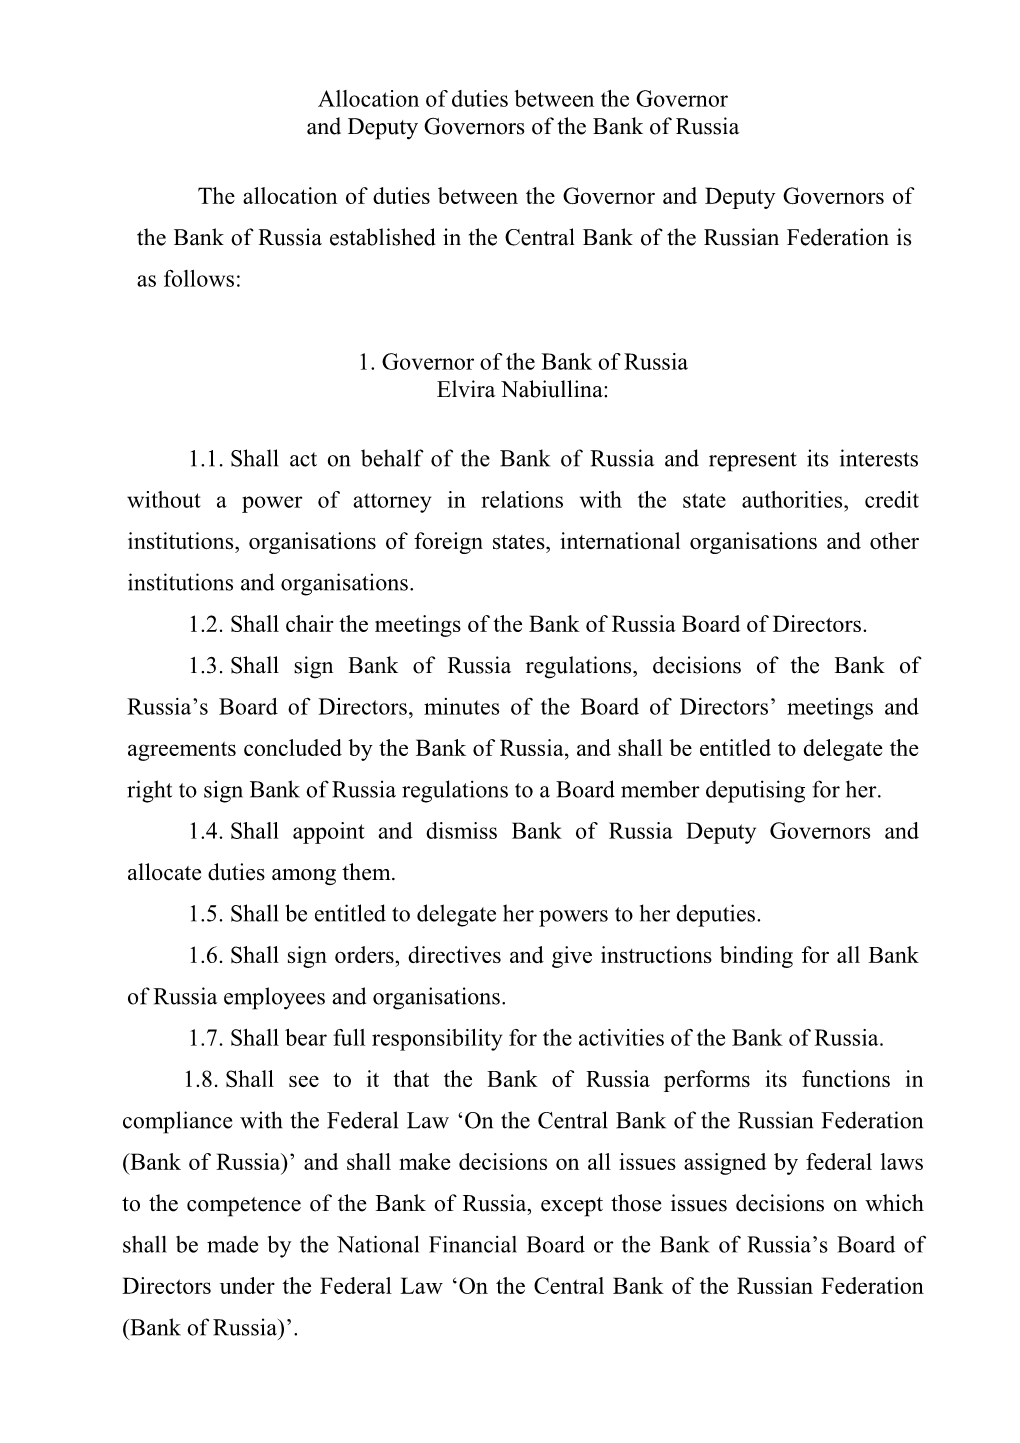 Allocation of Duties Between the Governor and Deputy Governors of the Bank of Russia